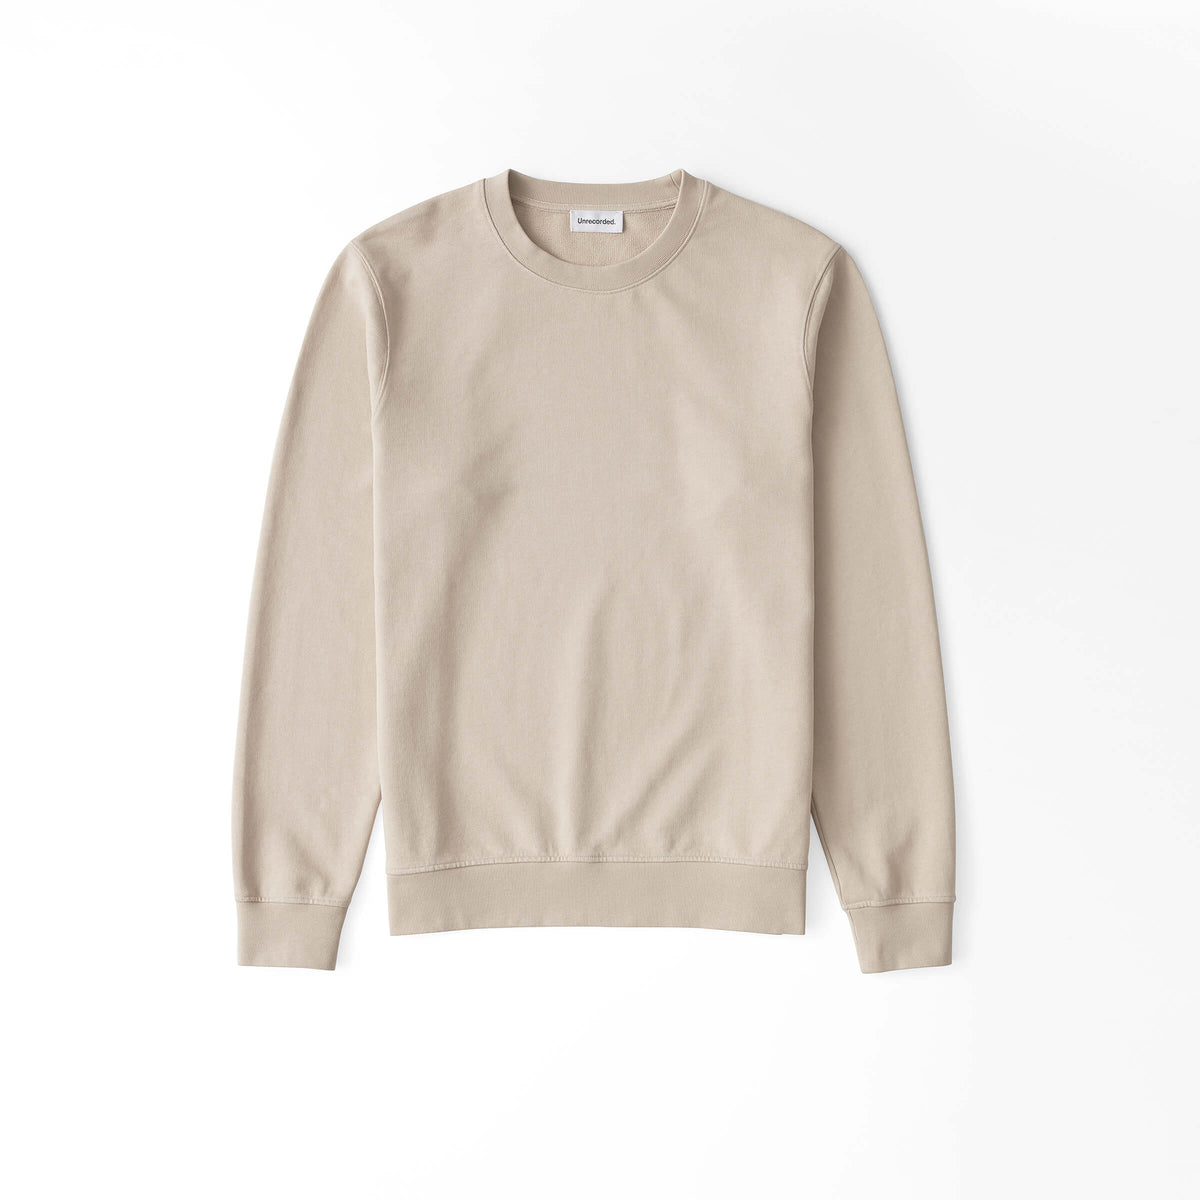 Sweater in Khaki made from organic cotton - Front Men - Only Men